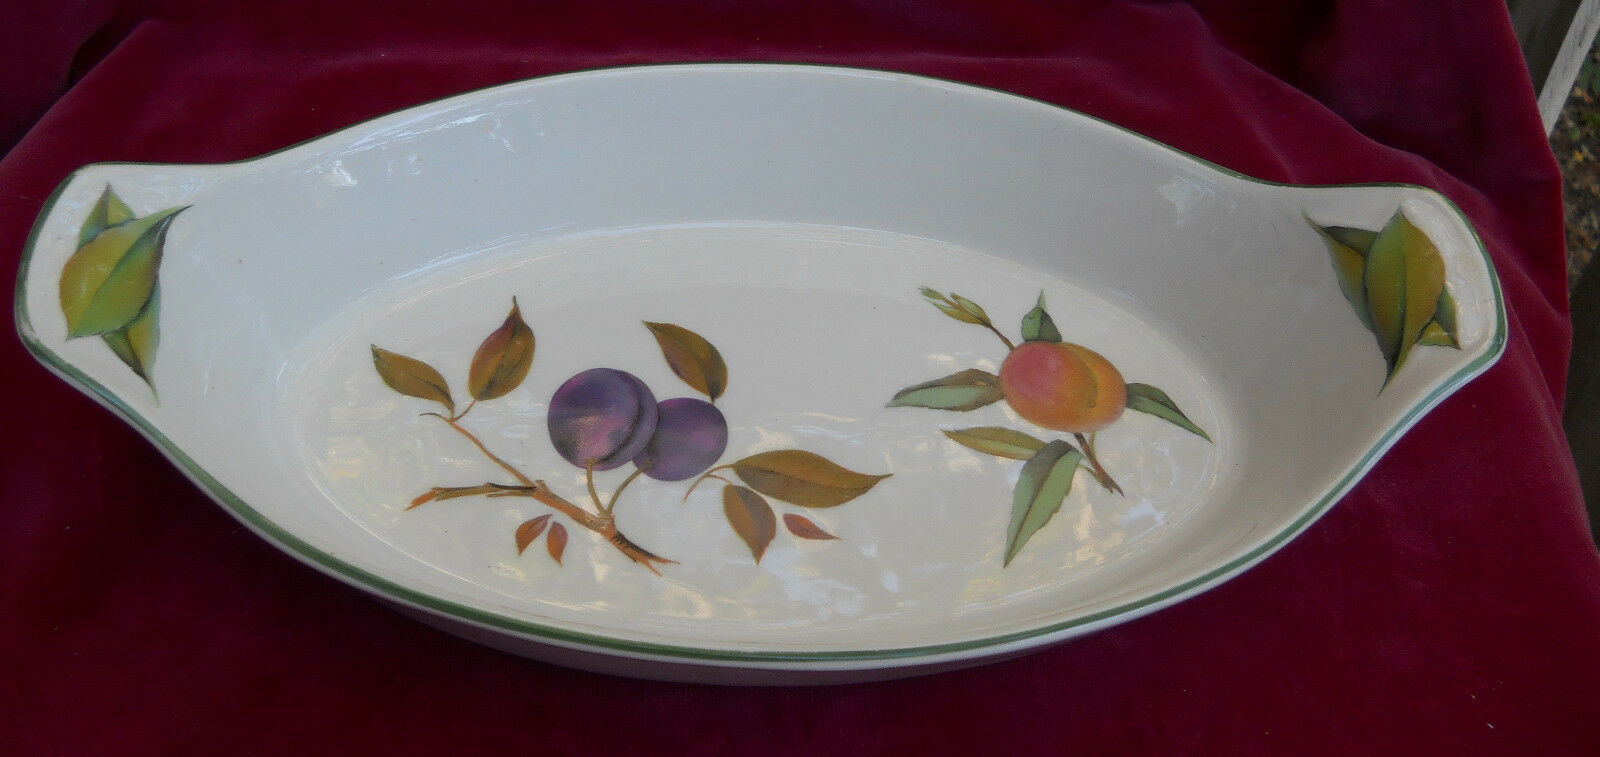 Primary image for ROYAL WORCESTER EVESHAM VALE CASSEROLE BAKER DISH AUGRATIN 13 1/2" PEACH PLUMS